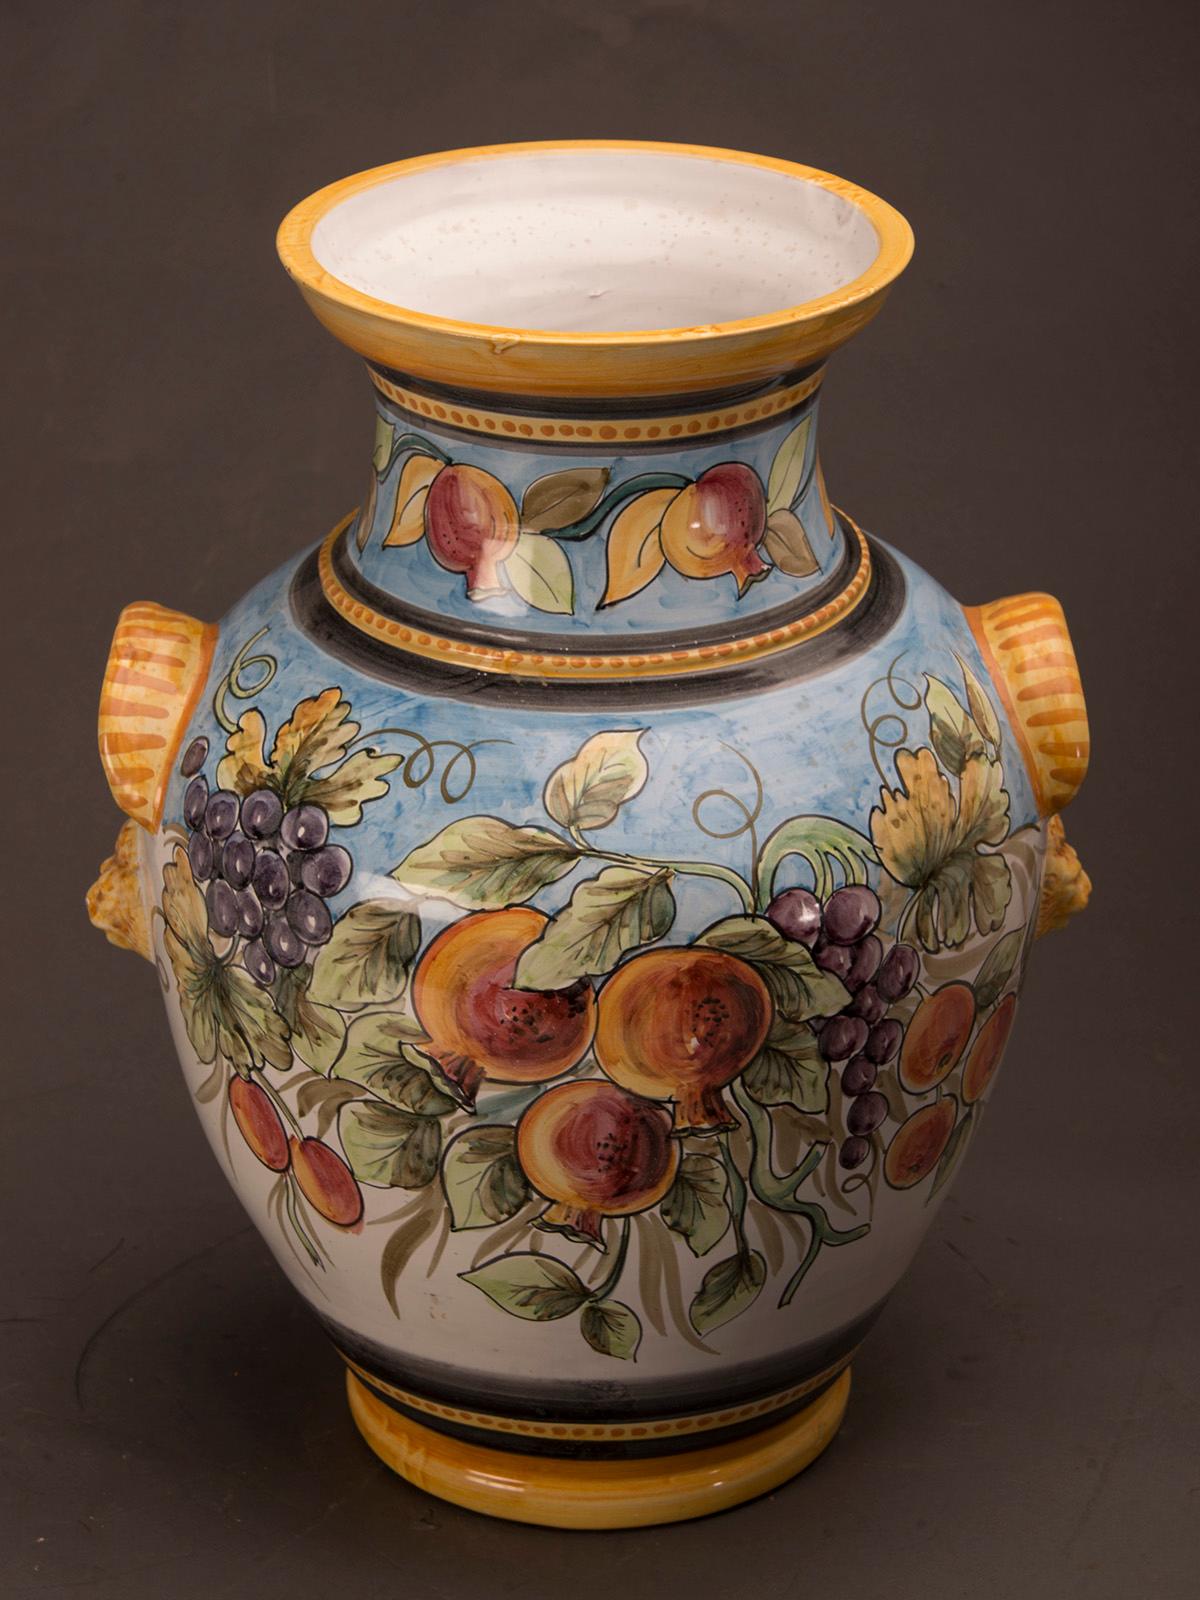 A beautiful huge vintage Italian hand painted terra cotta urn vase featuring an abundance of fruits including grapes and pomegranates. This vase may contain both dried and living material or may be used for display on its own. We have two available